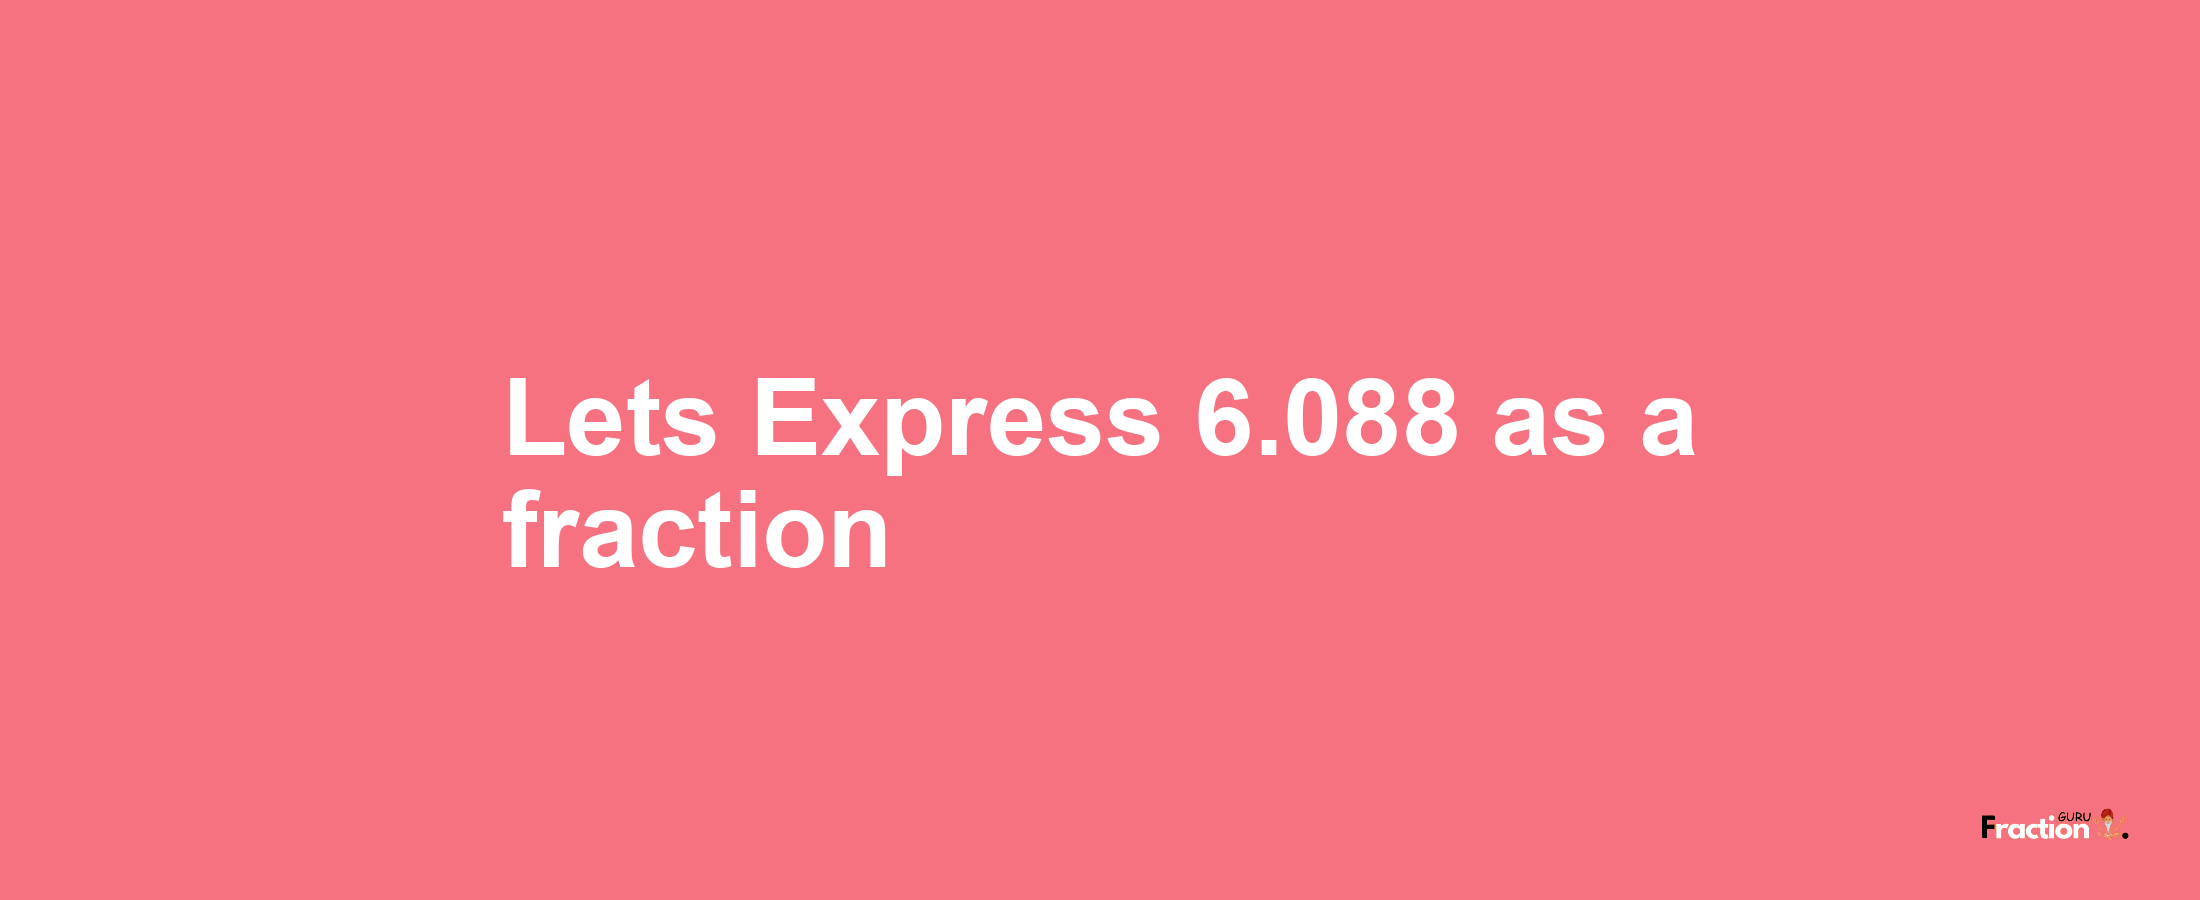 Lets Express 6.088 as afraction